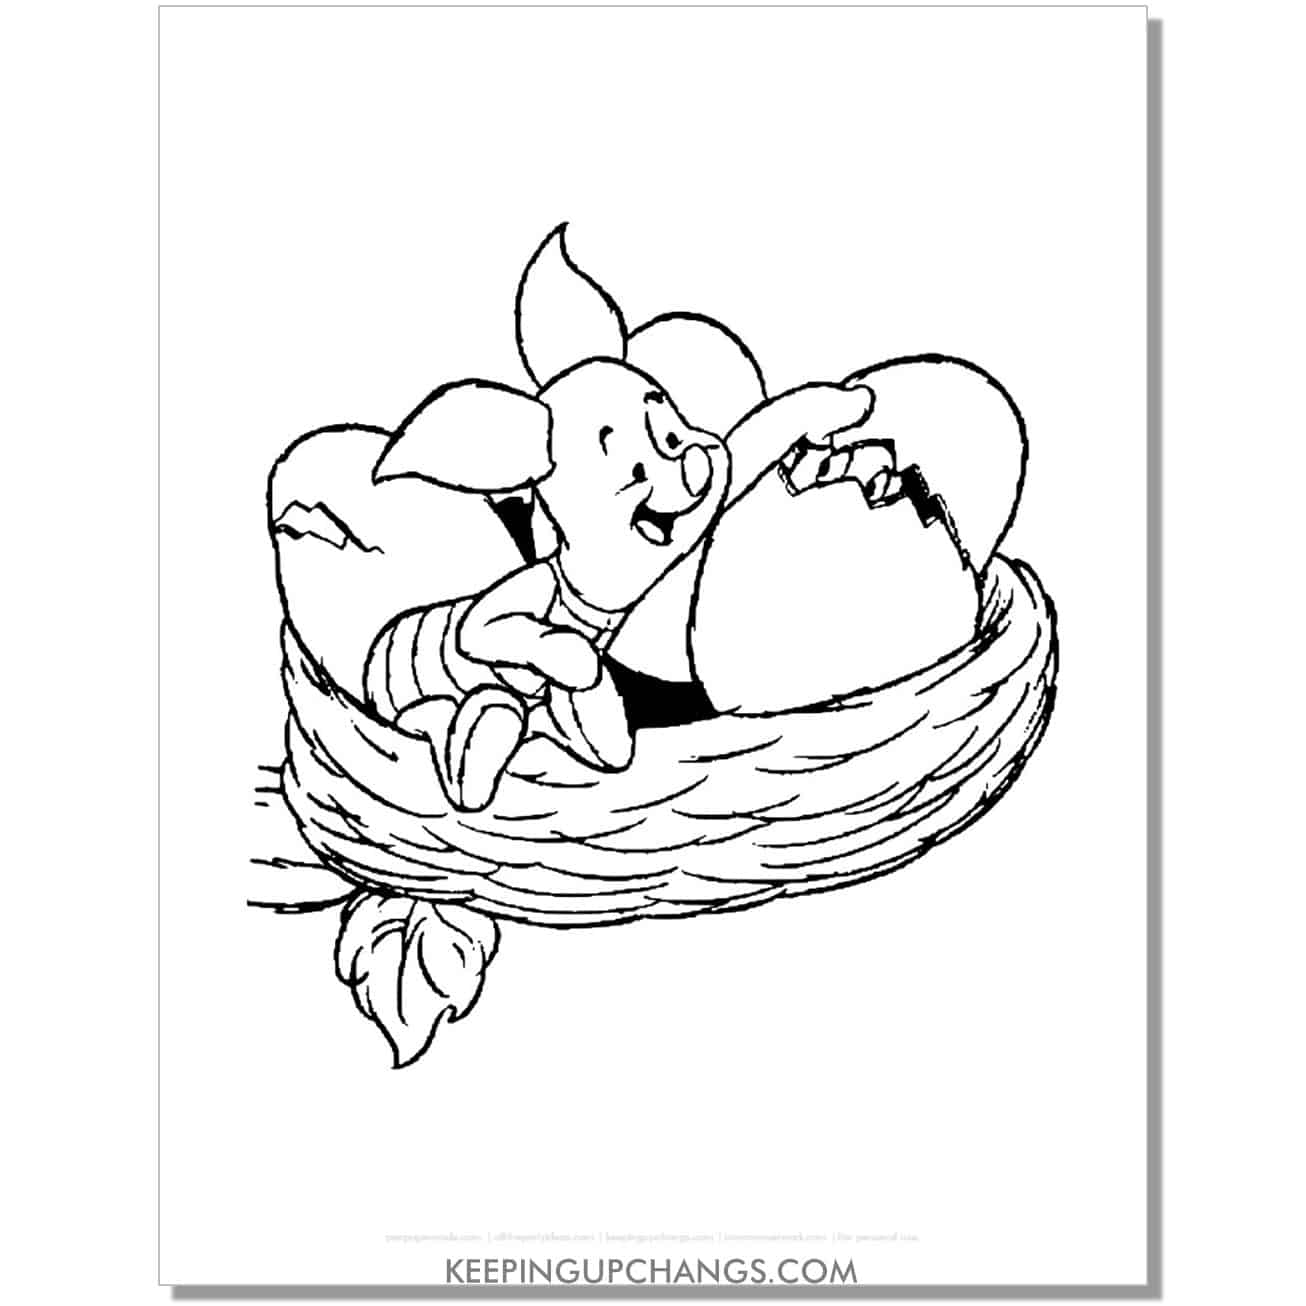 piglet watching egg hatch in bird nest coloring page, sheet.